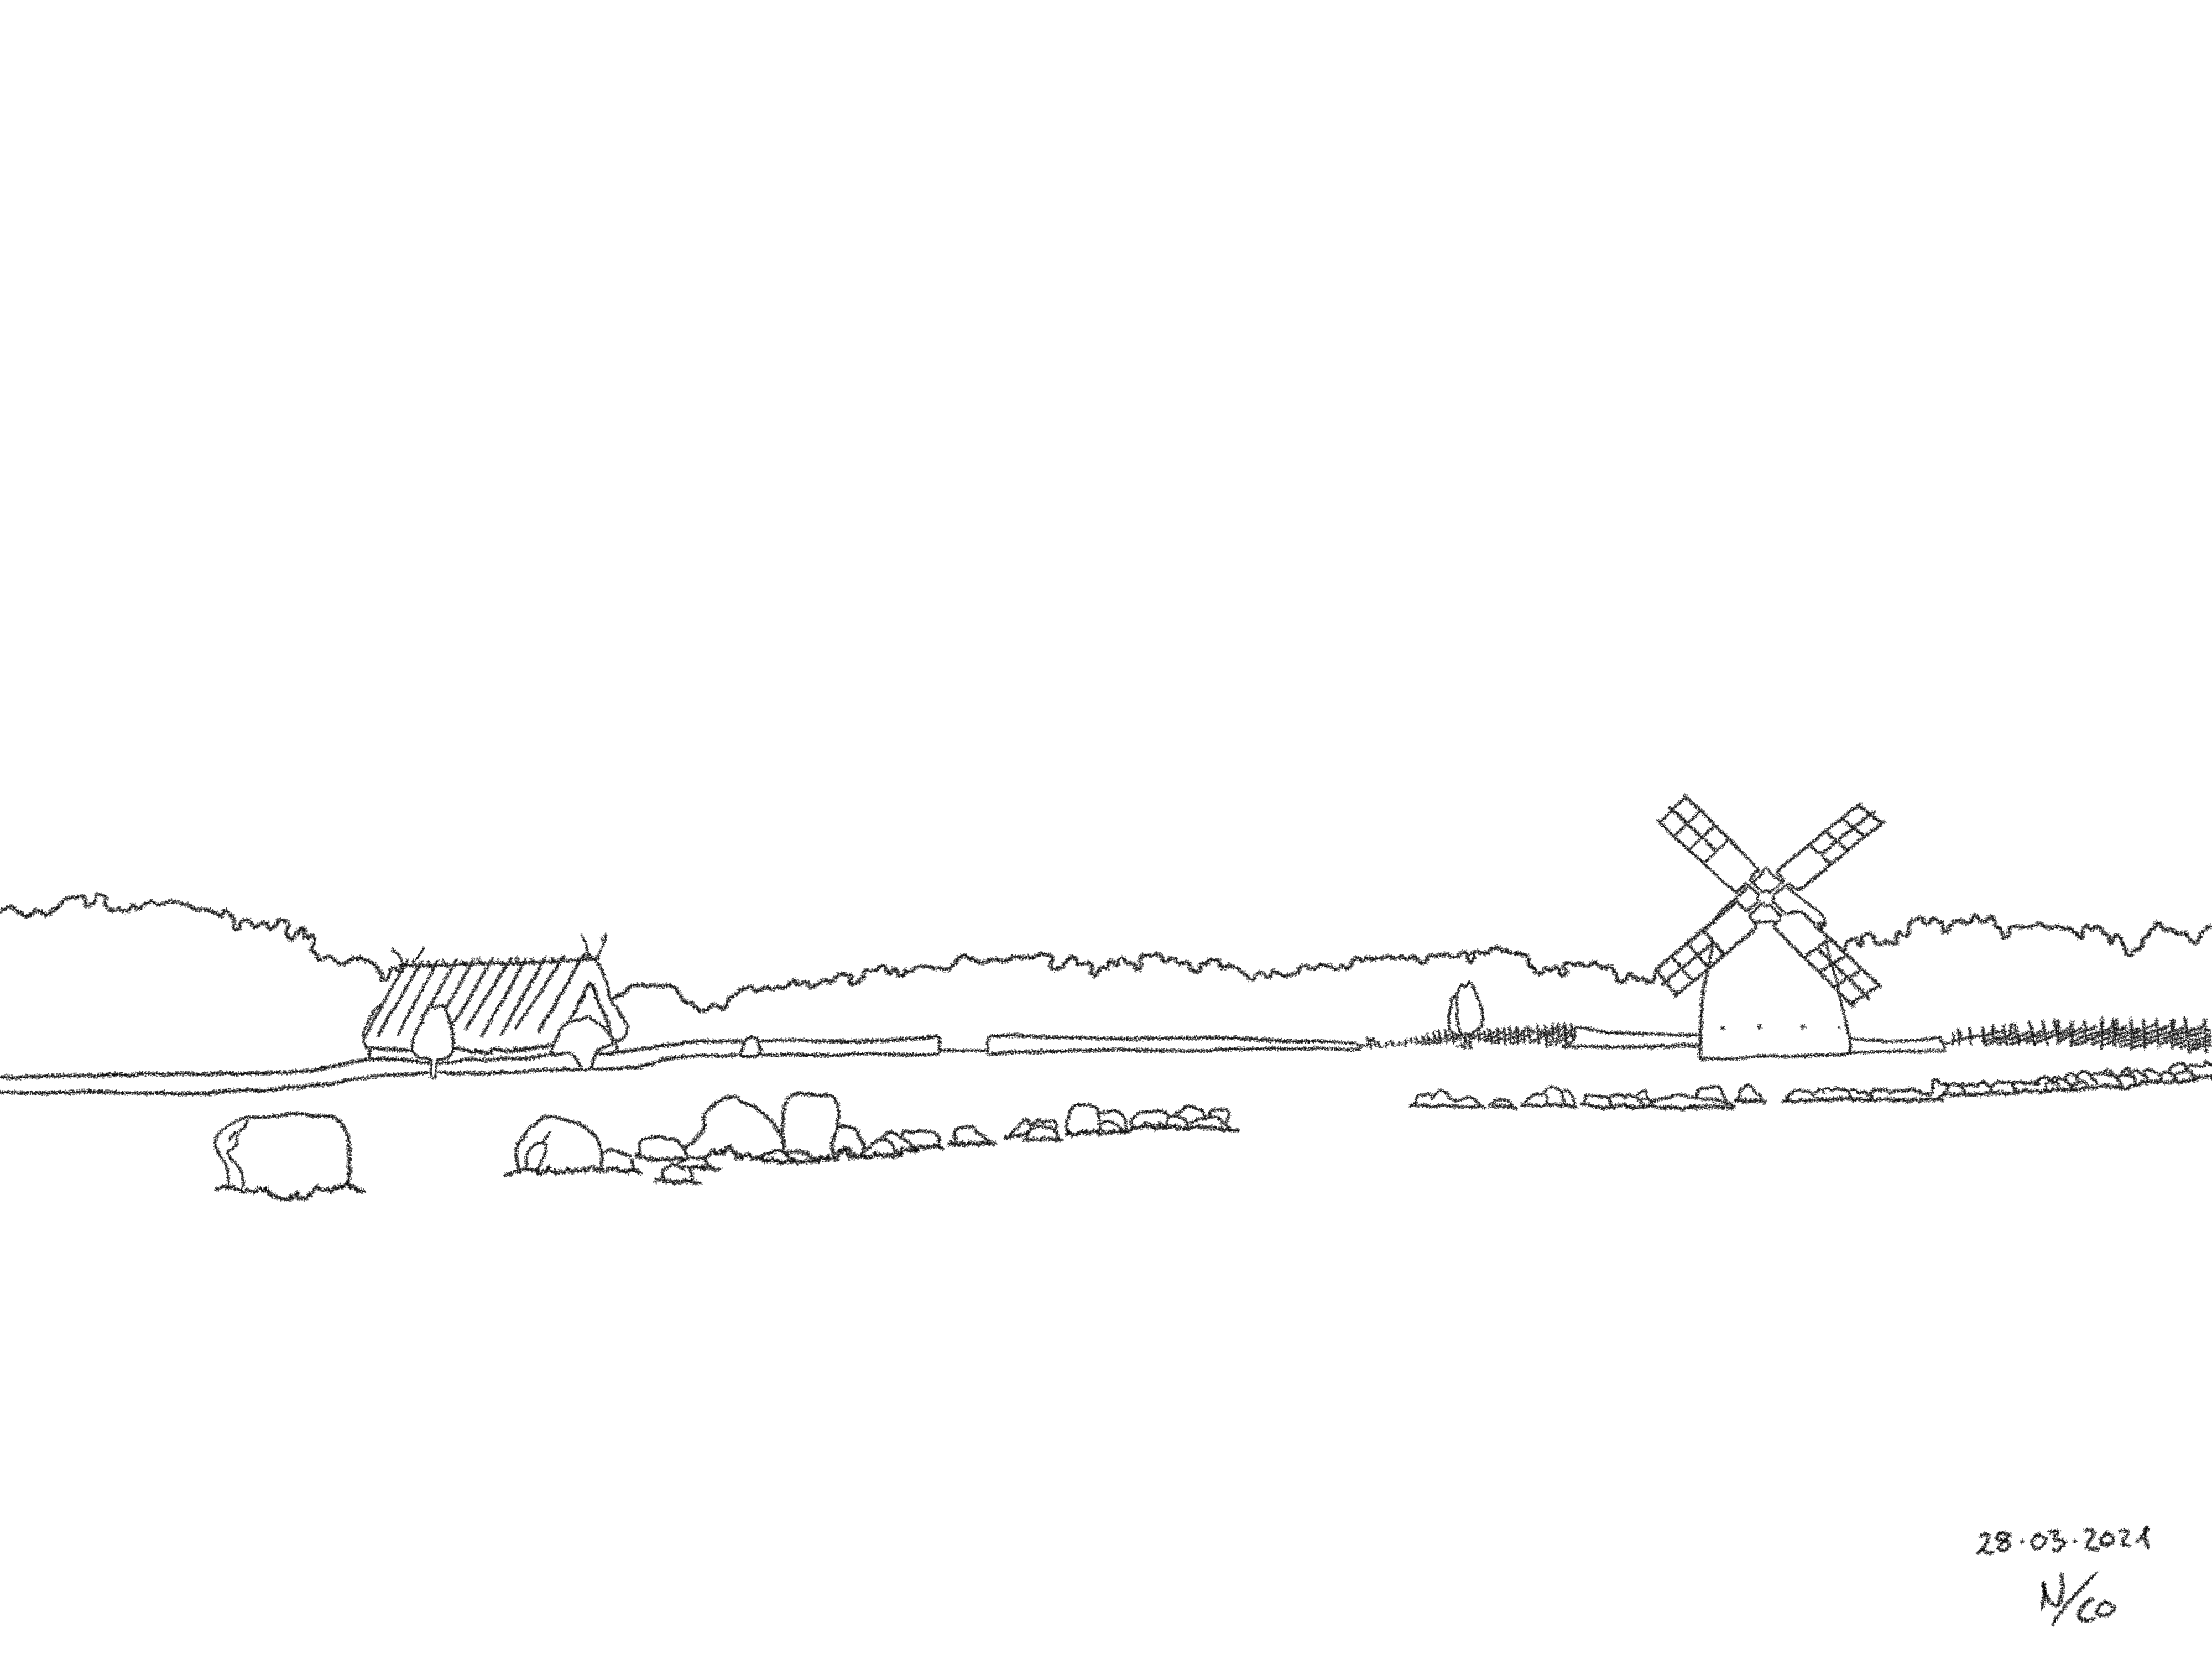 A drawing titled The Windmill, based on a photo taken on Fårö as part of Gotland.